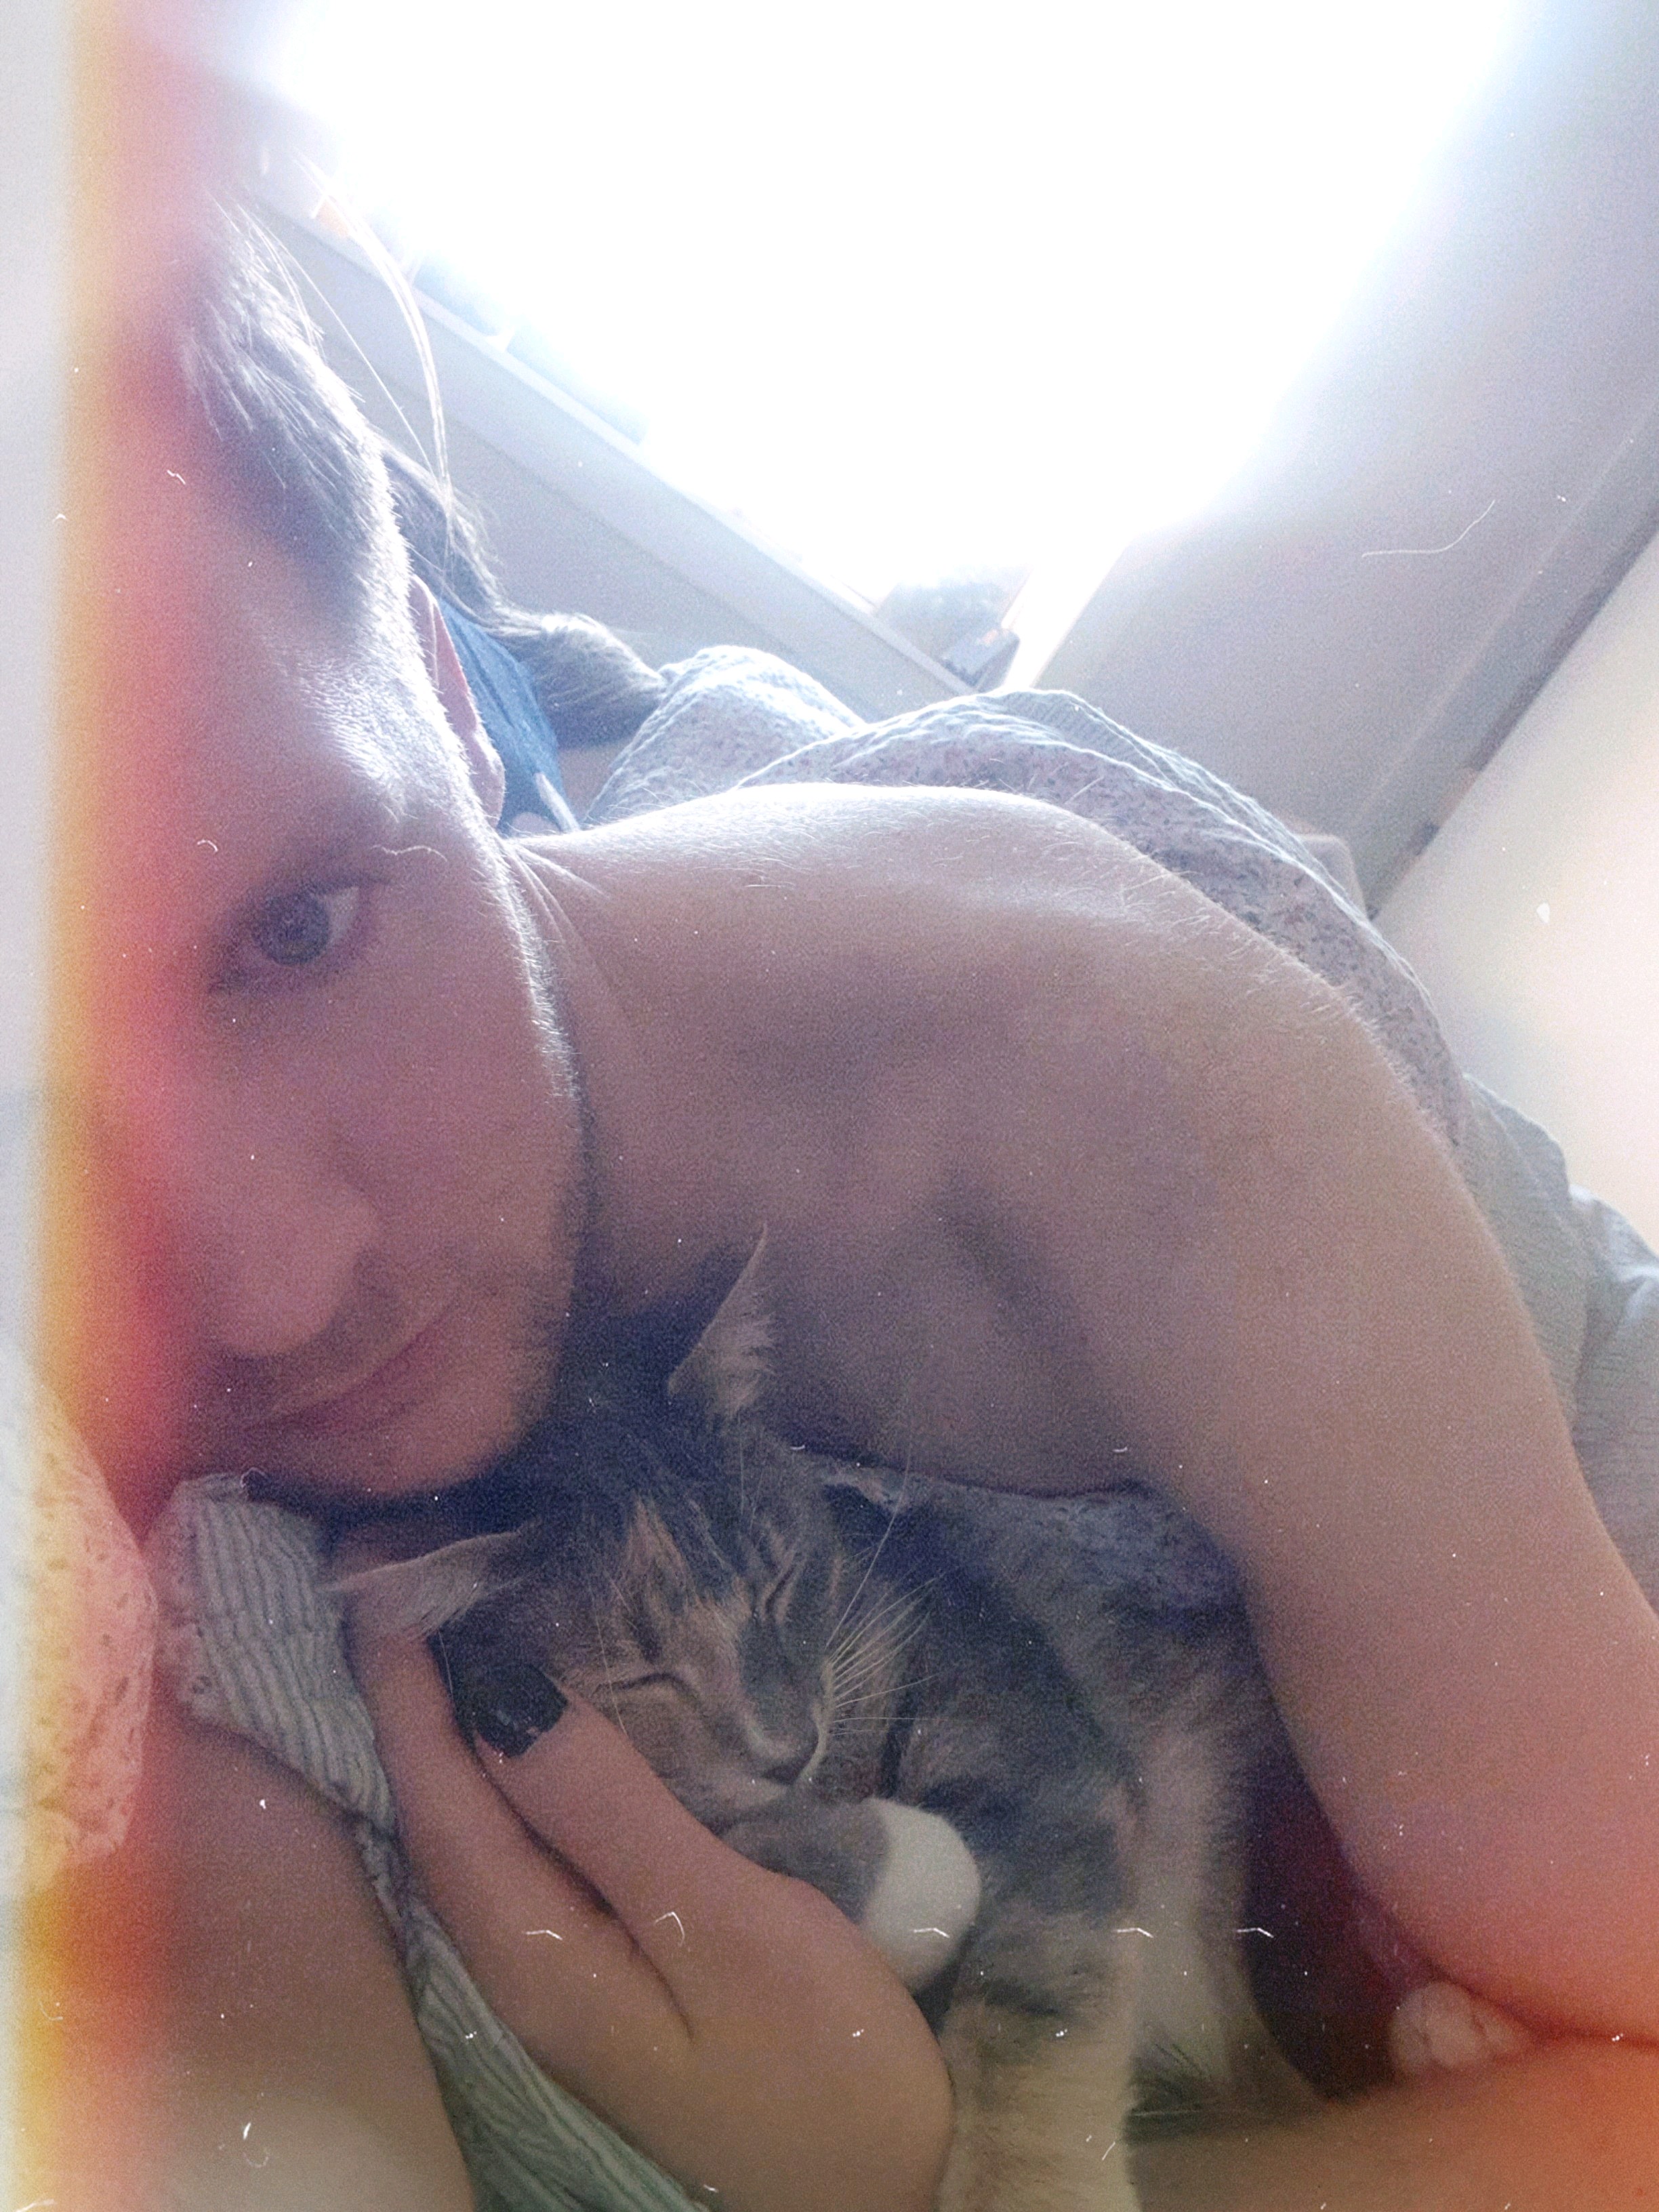 A photo of coxy lay in bed cuddling with a cute kitten, who is sleeping in his arms.